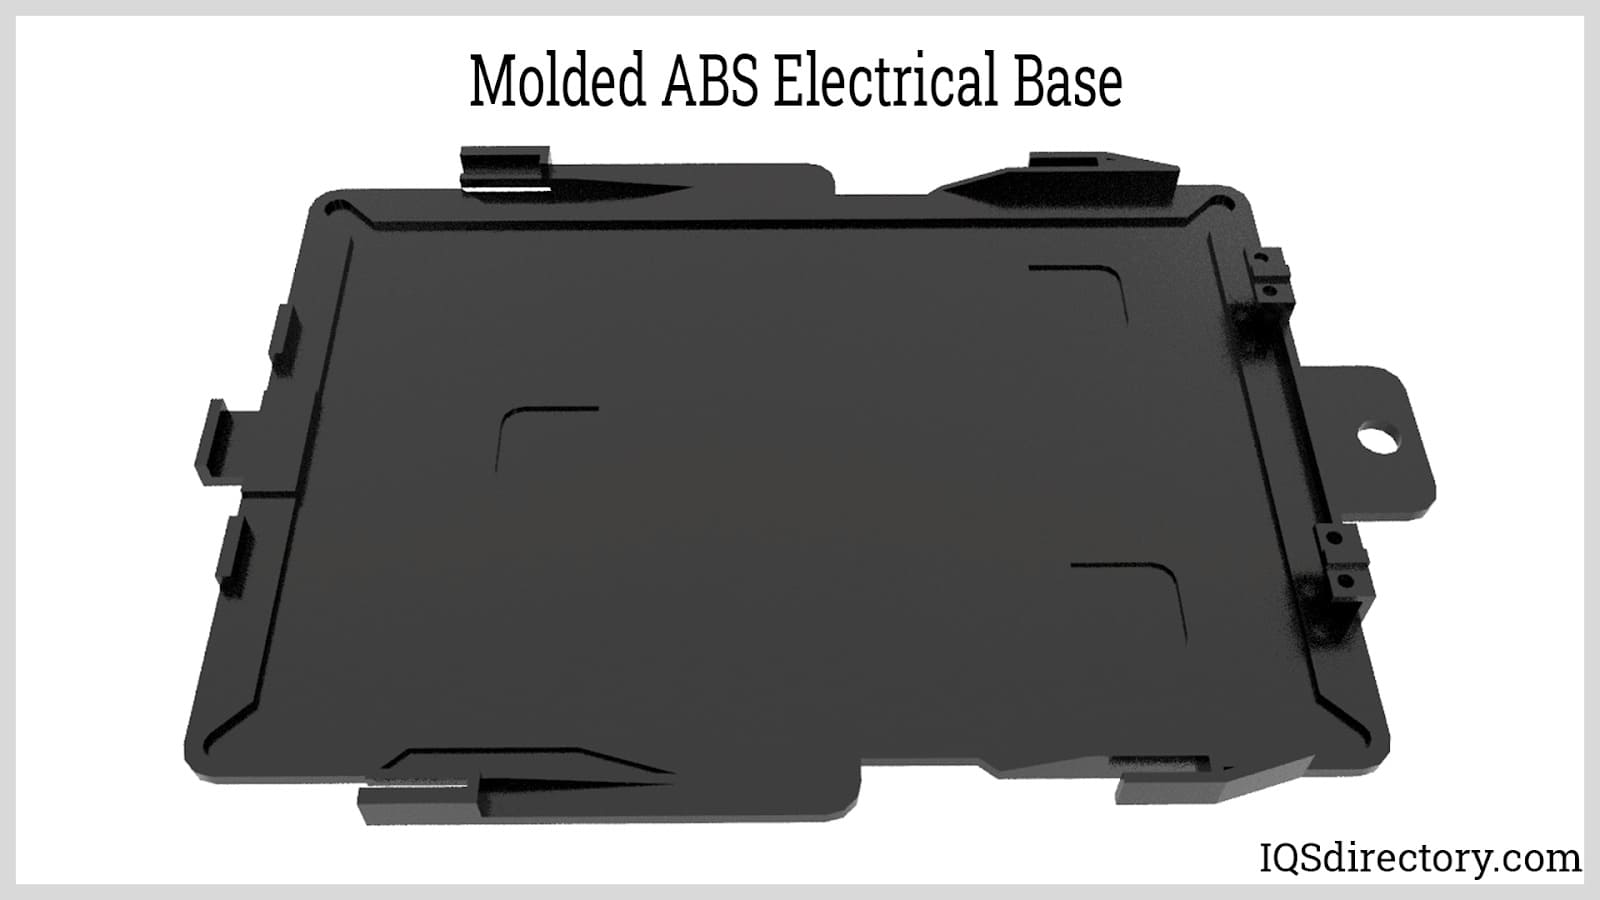 Molded ABS Electrical Base